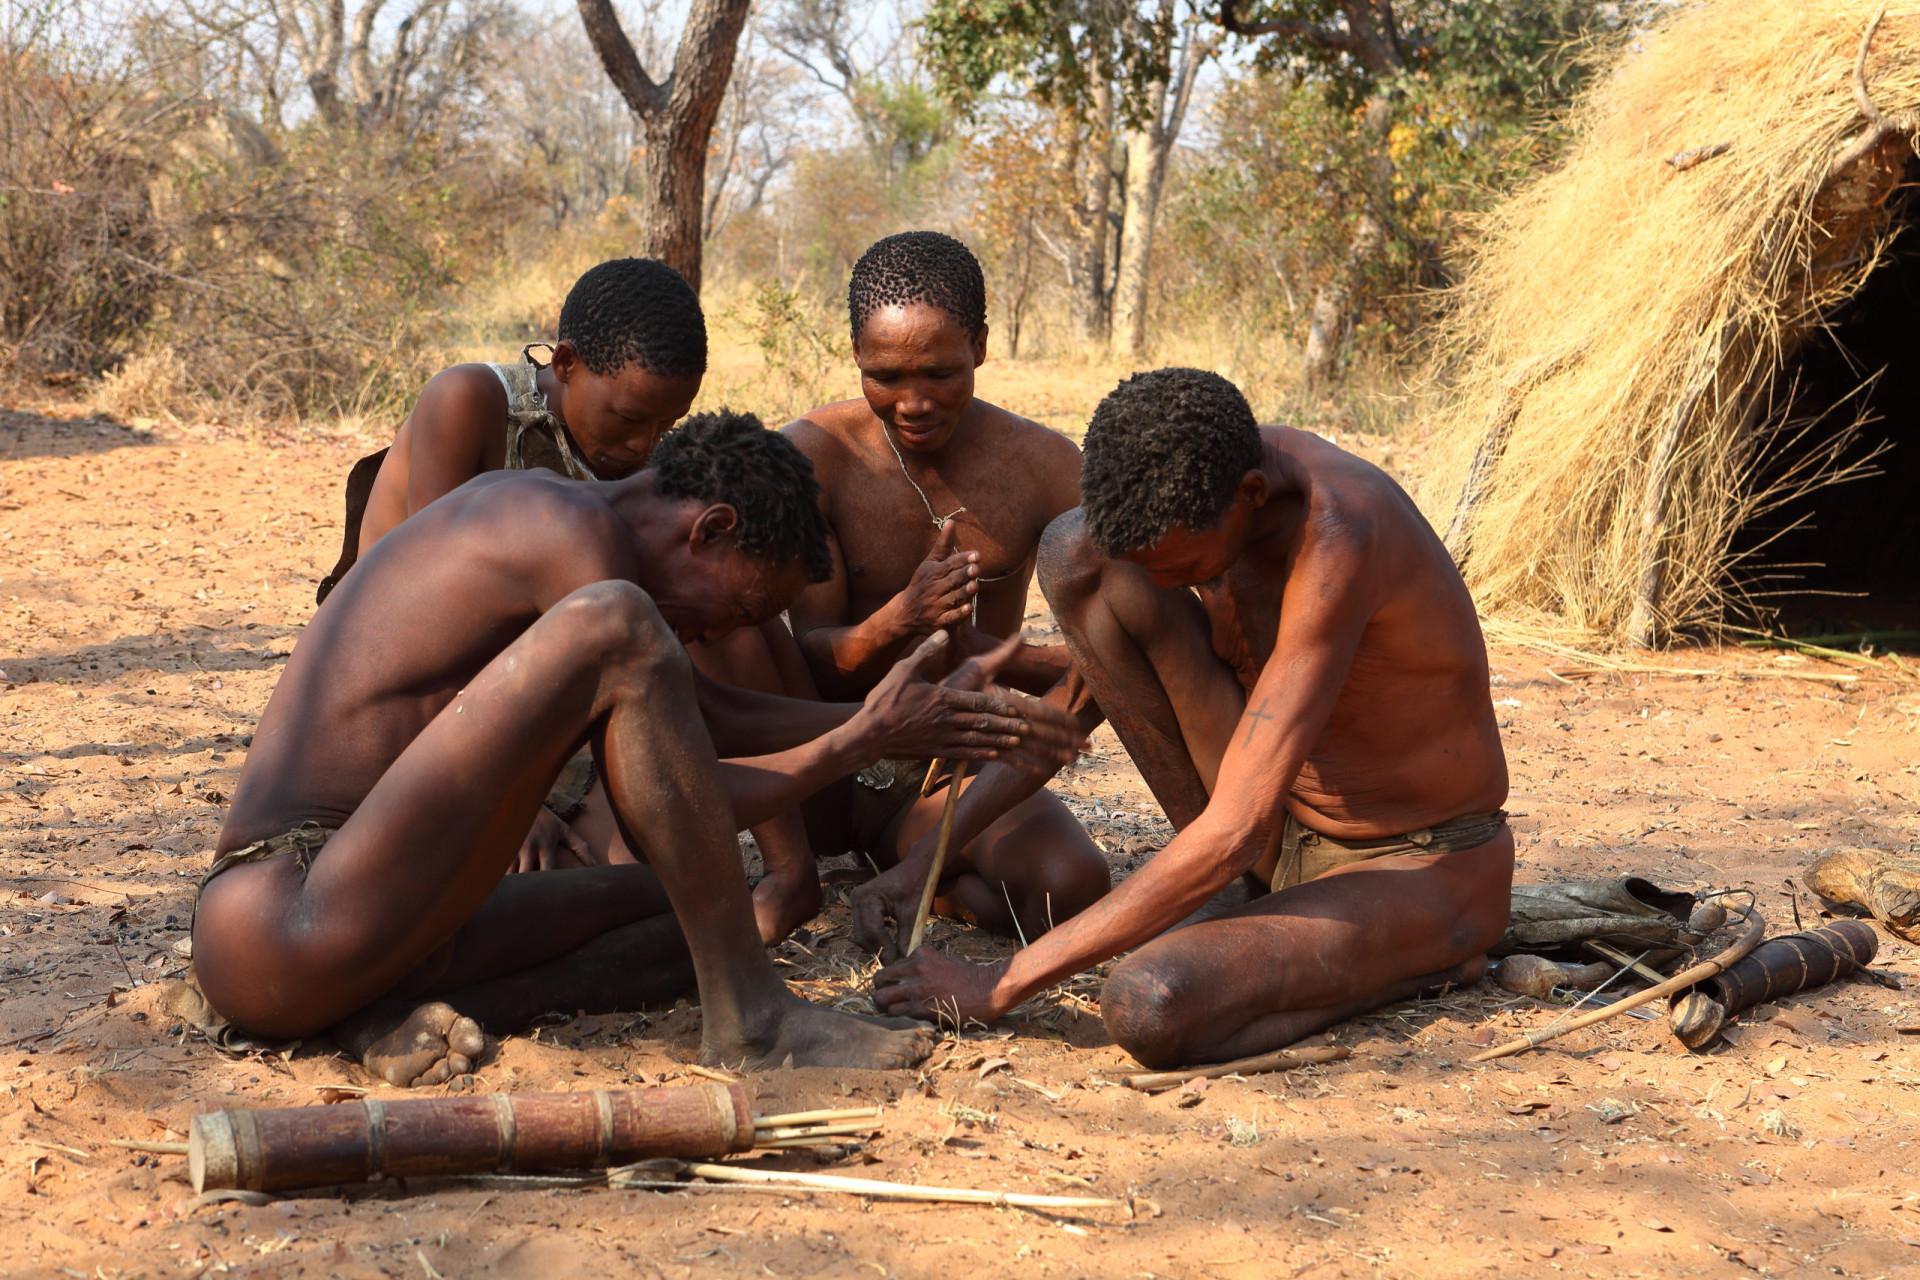 <p>The Nama indigenous tribe is deeply connected to the desert of Southern Africa, and most of their traditions are adapted to the arid conditions. Indeed, the Nama people are known for their resilience and resourcefulness in such harsh conditions.</p><p><a href="https://www.msn.com/en-us/community/channel/vid-7xx8mnucu55yw63we9va2gwr7uihbxwc68fxqp25x6tg4ftibpra?cvid=94631541bc0f4f89bfd59158d696ad7e">Follow us and access great exclusive content every day</a></p>